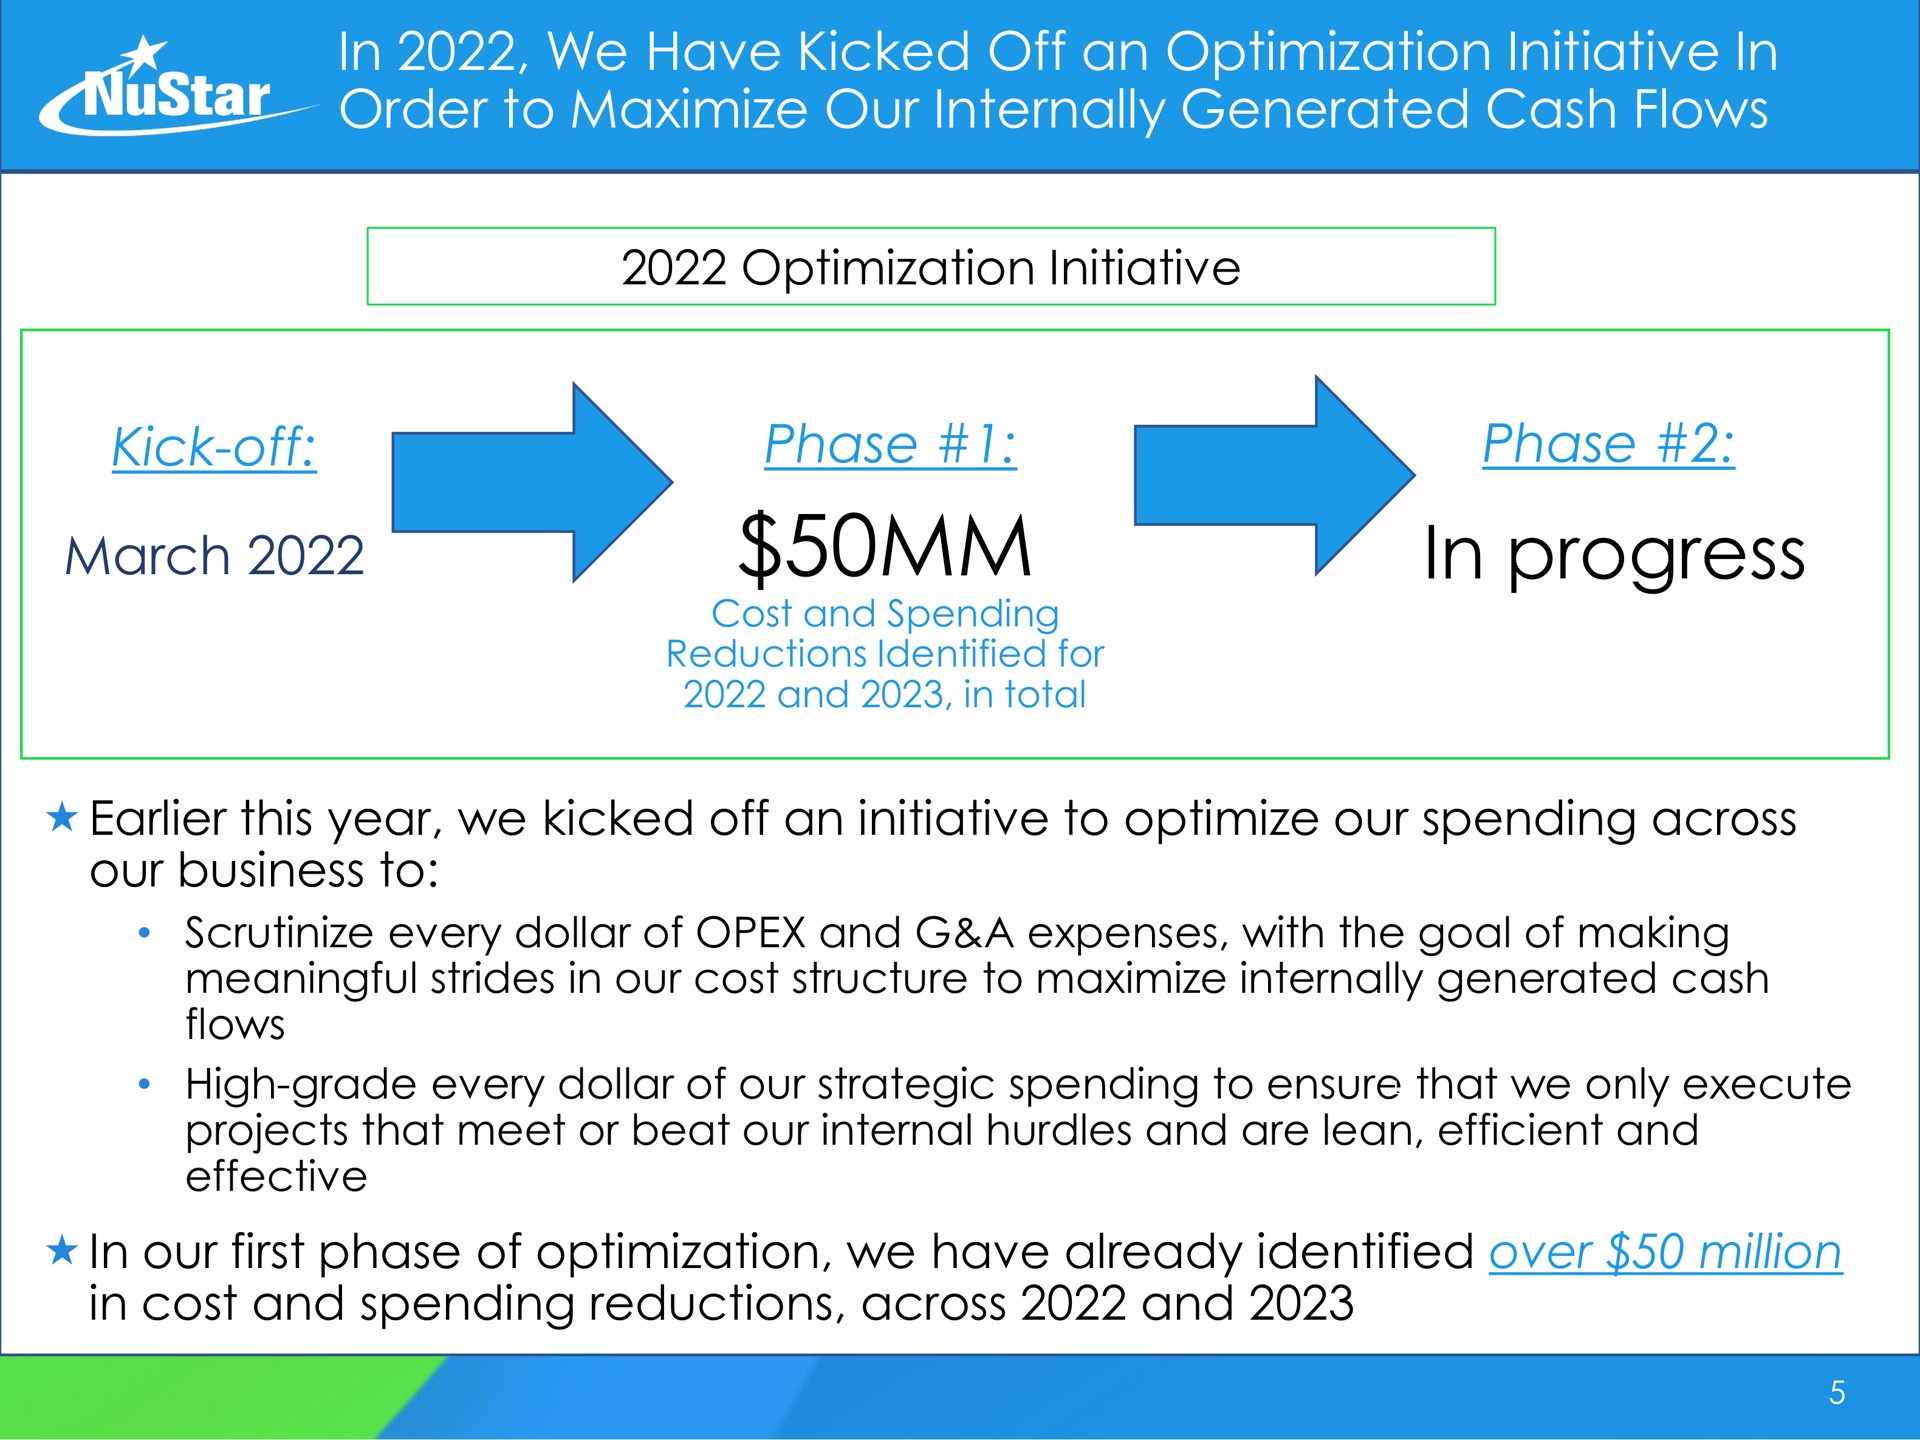 in we have kicked off an optimization initiative in order to maximize our internally generated cash flows optimization initiative kick off march phase phase in progress this year we kicked off an initiative to optimize our spending across our business to in our first phase of optimization we have already identified over million in cost and spending reductions across and patties | NuStar Energy